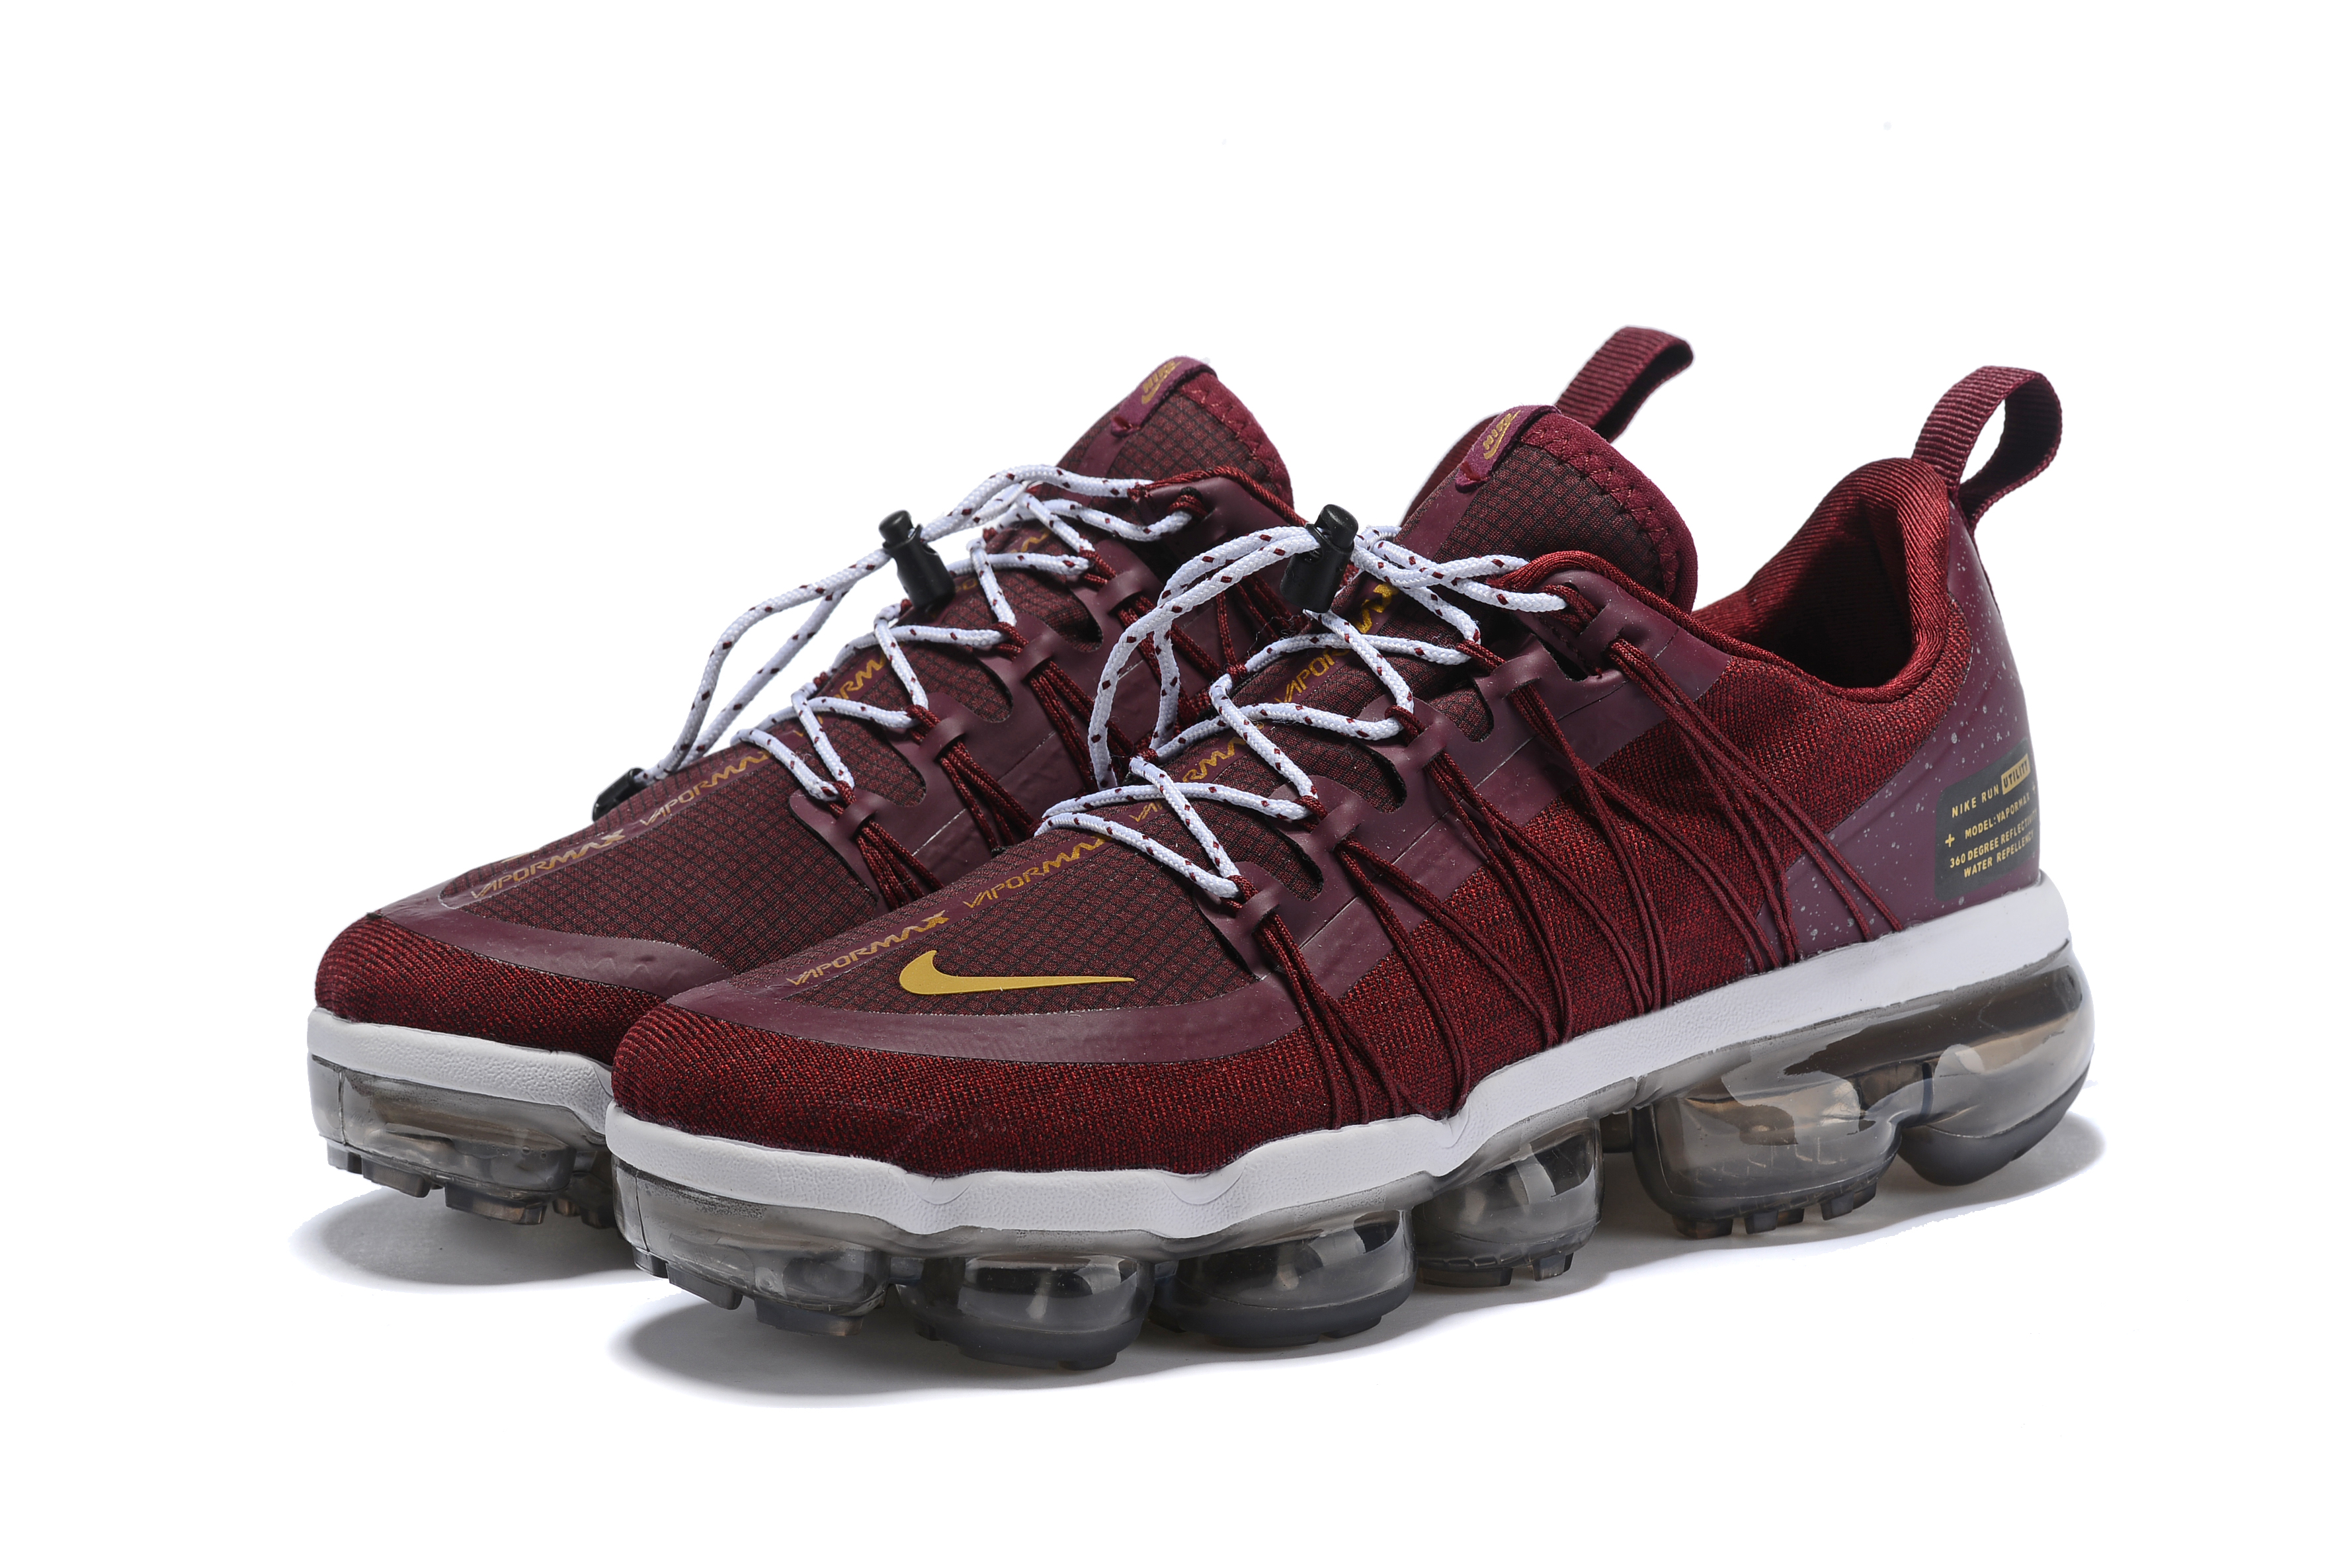 Men's Running weapon Nike Air Max 2019 Shoes 018